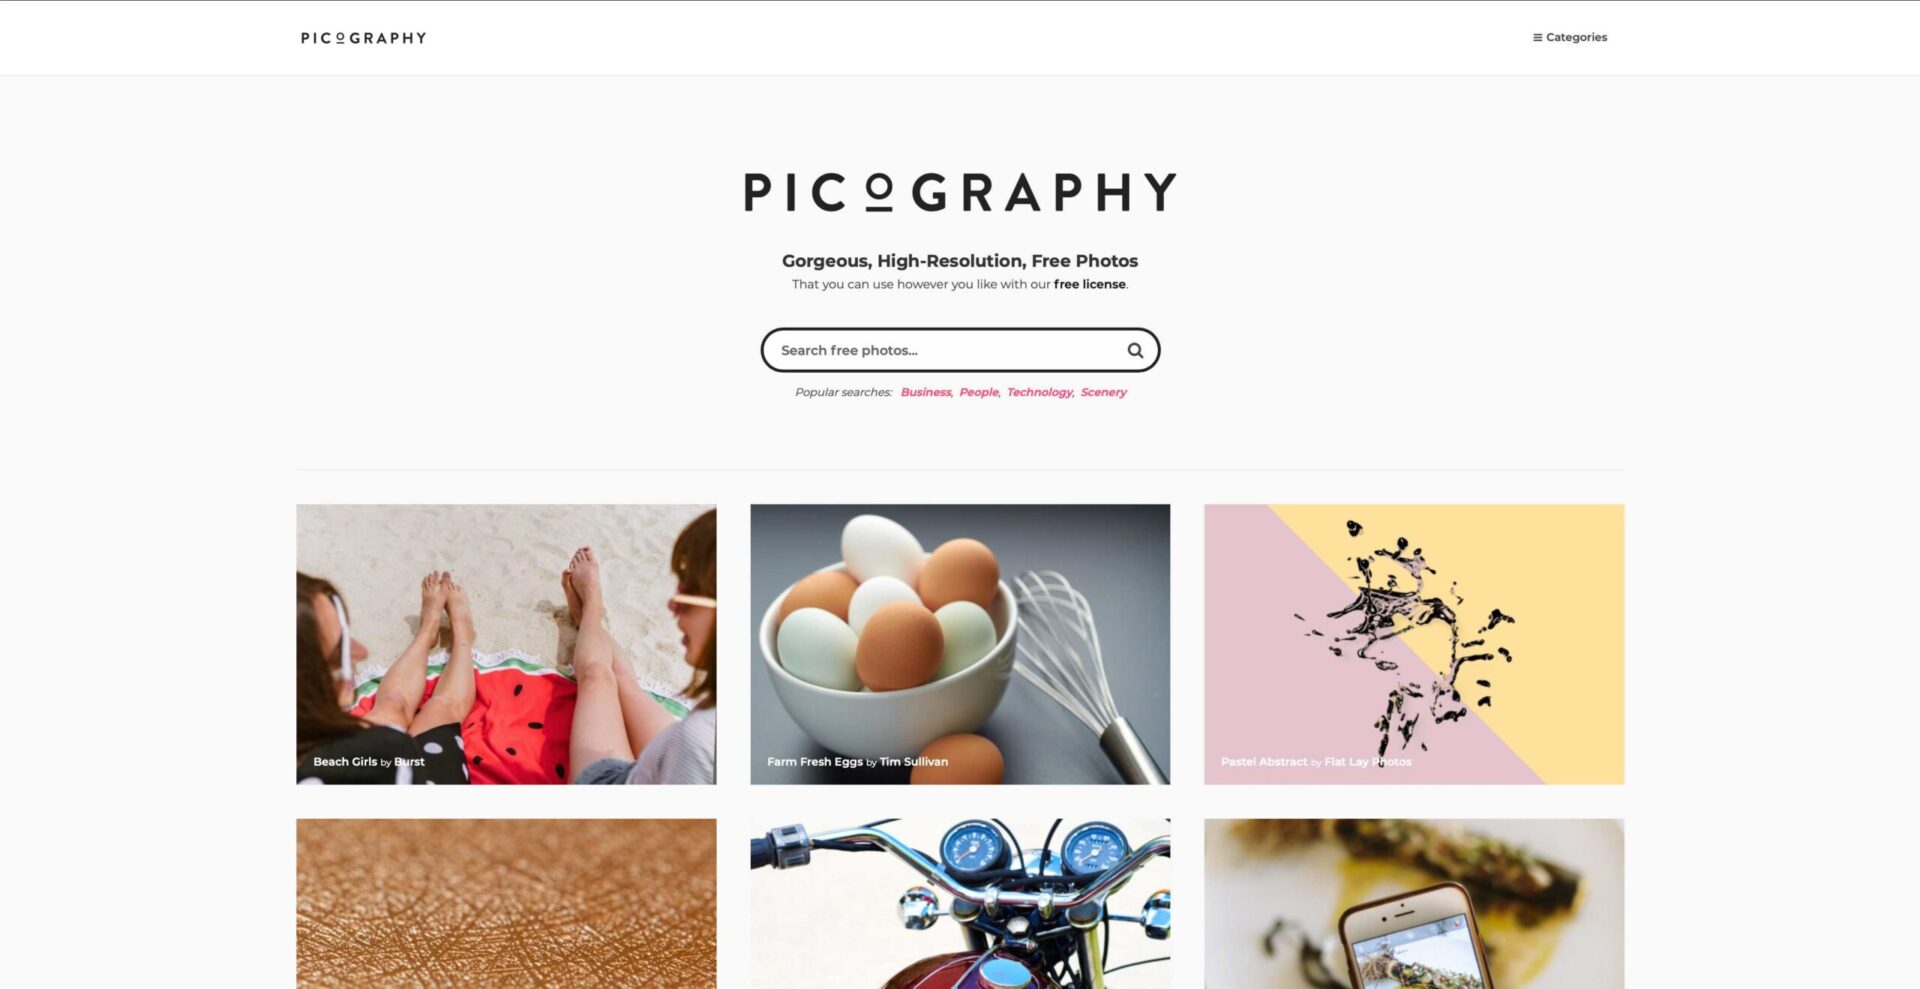 15 Free Stock Photography Websites You Should Be Using For Your Next Project - 02 Free Stock Websites picography. scaled 1